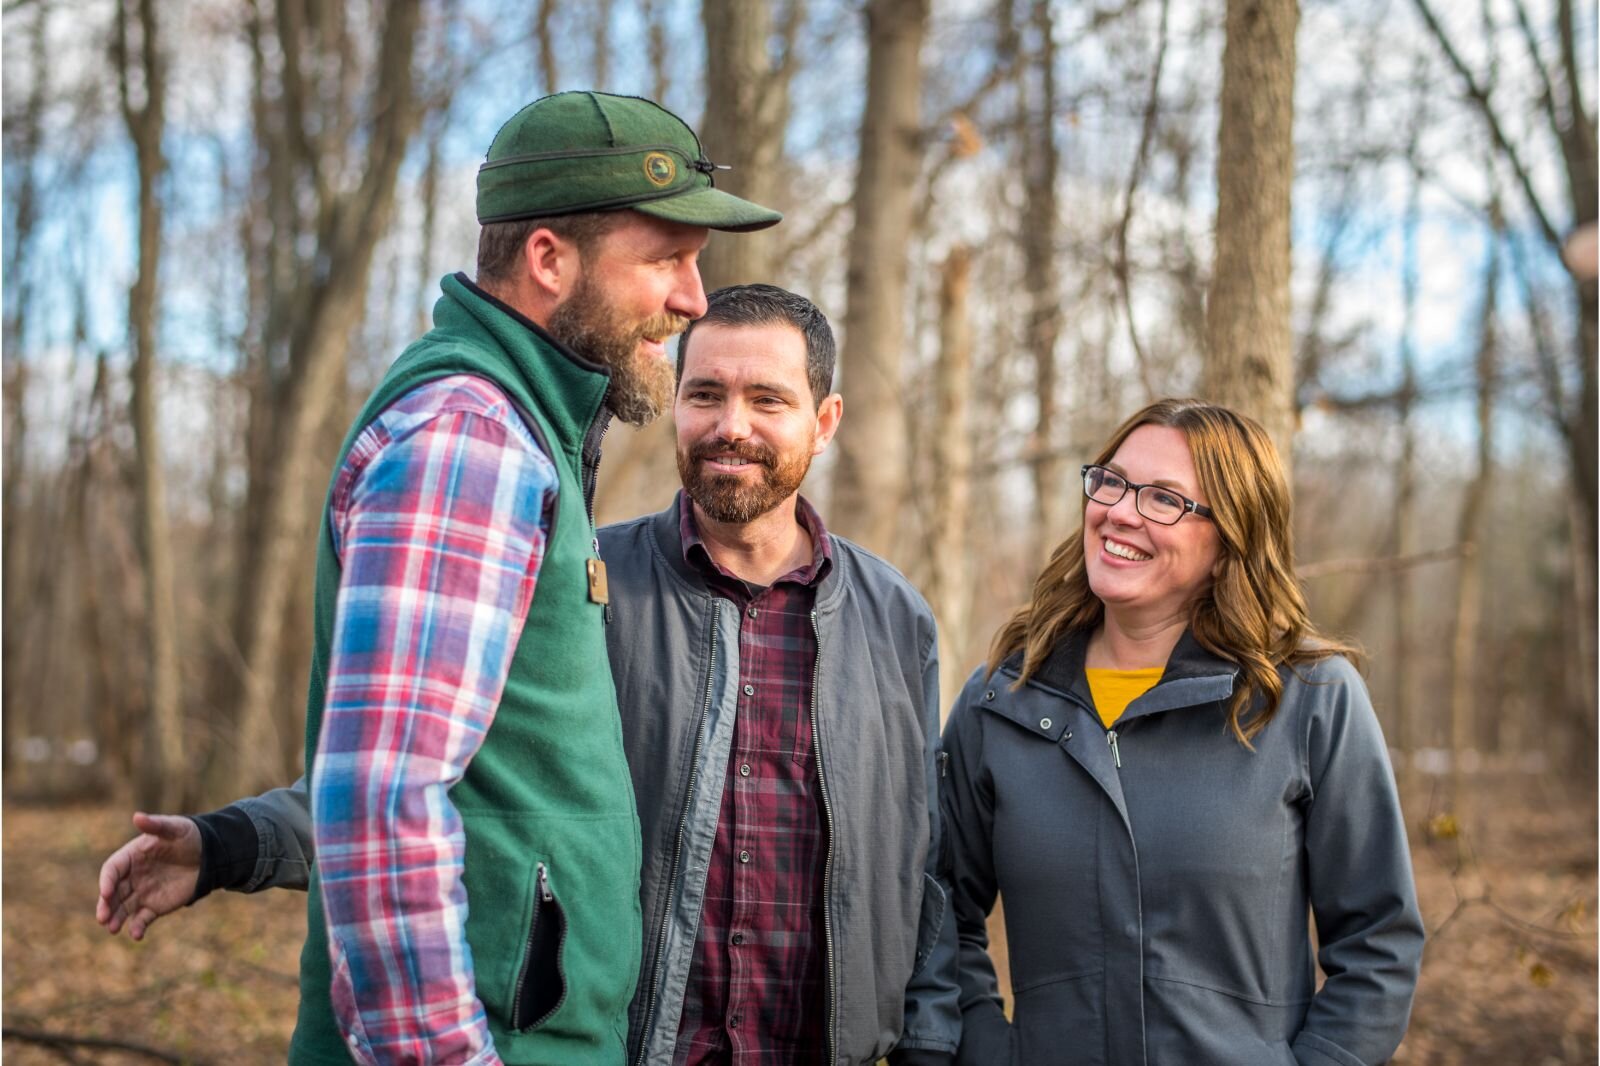 The possible partnership to restore the 15 acres behind New Day Church happened over a chance meeting between DNR Mark Mills and Co-Pastors Bill and Marilee Menser while at a school event.